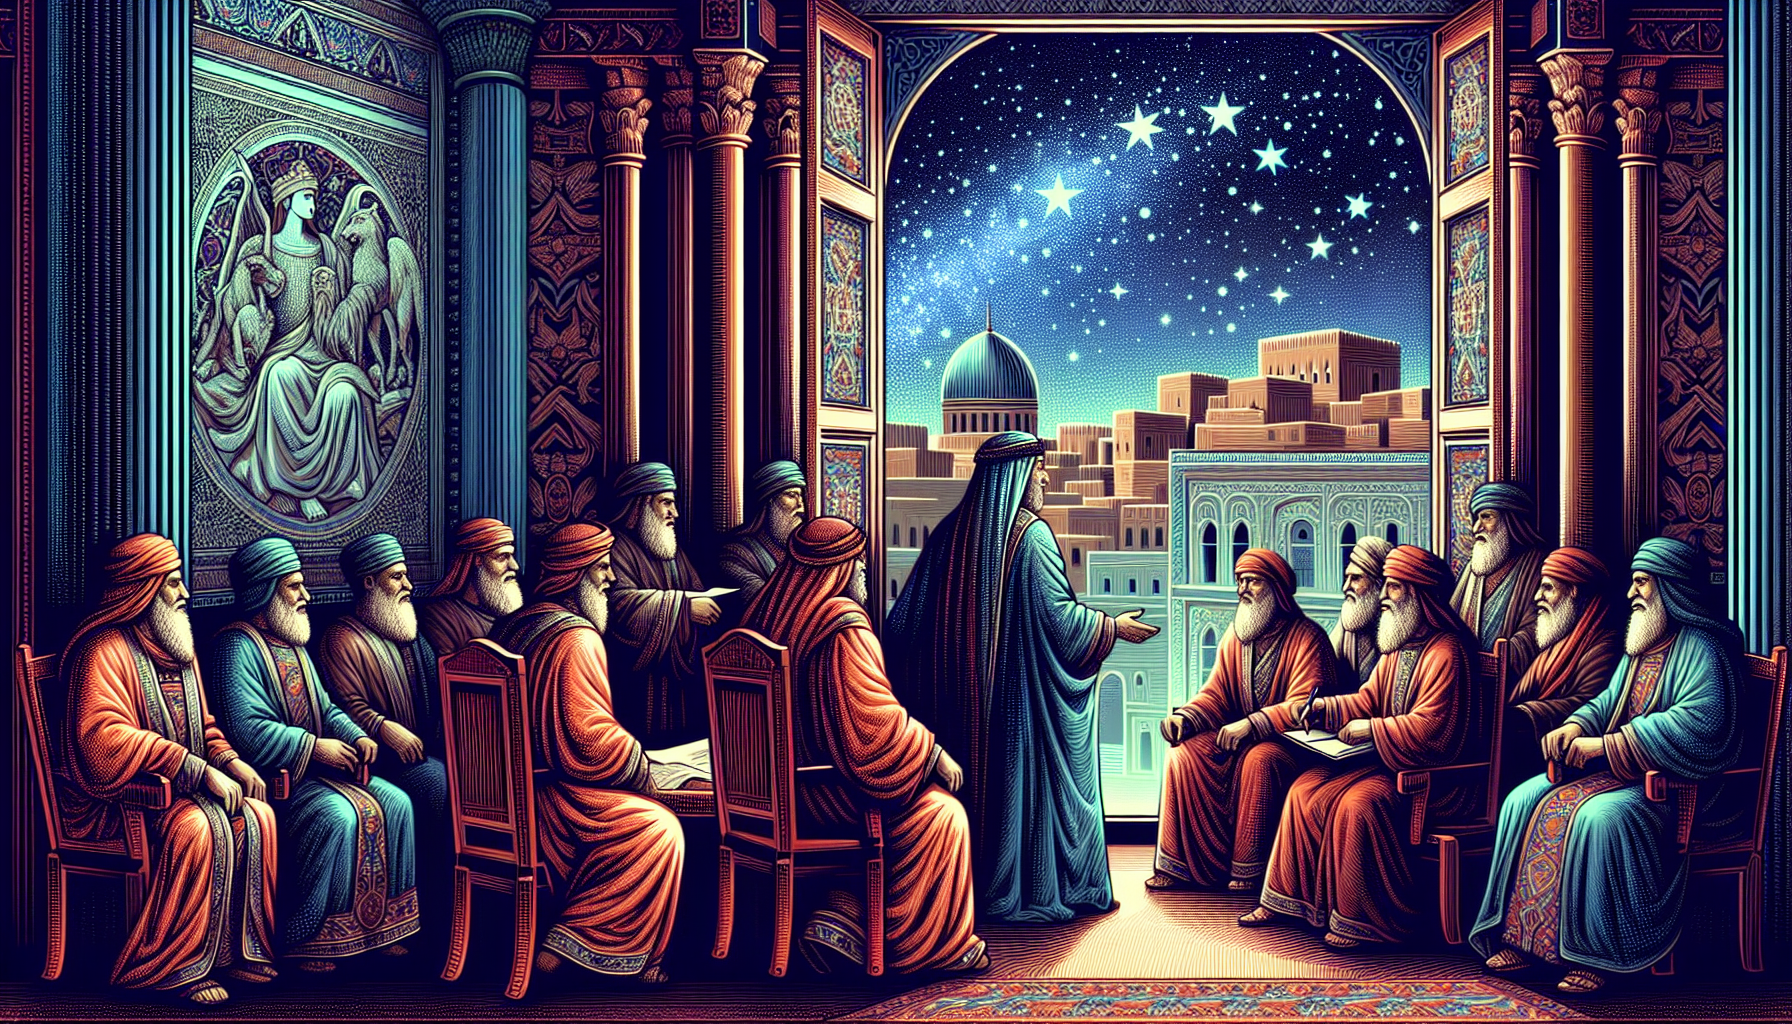 Painting of King Herod in a royal court setting, consulting with advisors, with a subtle depiction of Bethlehem in the background and a starry night sky visible through a window, reflecting on his rol